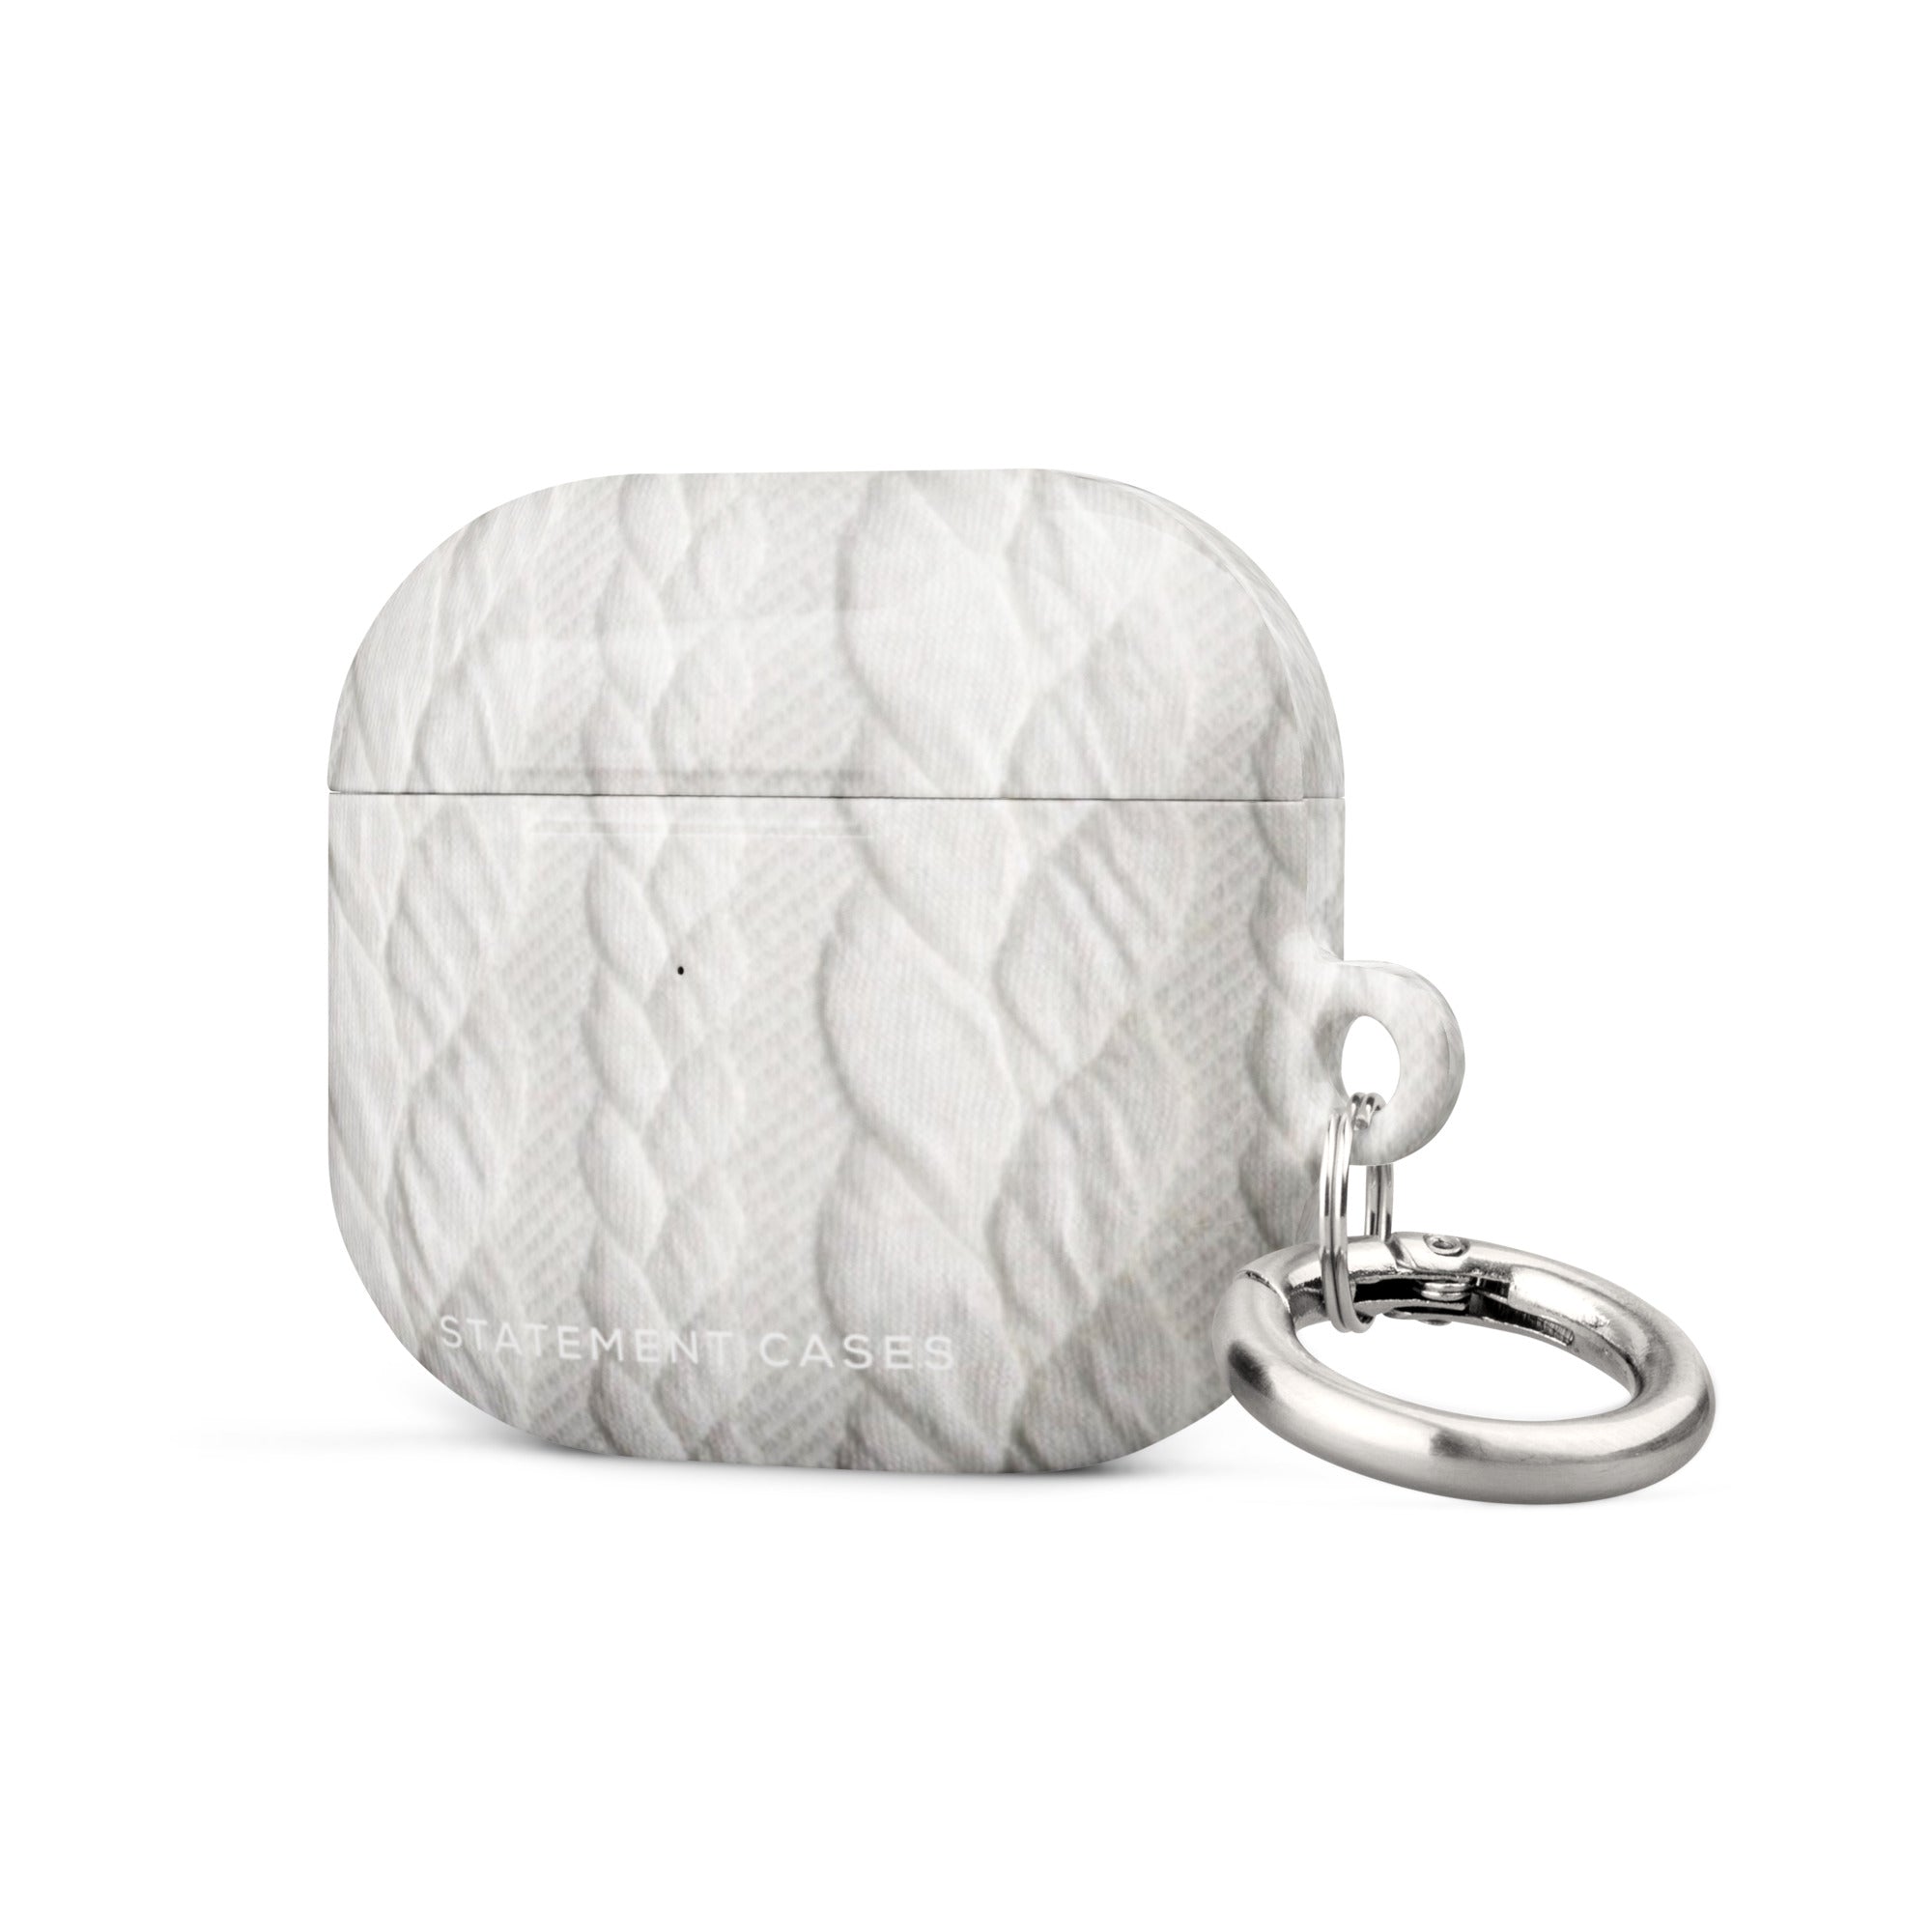 A white, impact-absorbing Cozy Knit Bliss for AirPods Gen 3 case with a knitted texture design and a metal carabiner attached to the side. The brand "Statement Cases" is printed at the bottom, ensuring both style and protection.